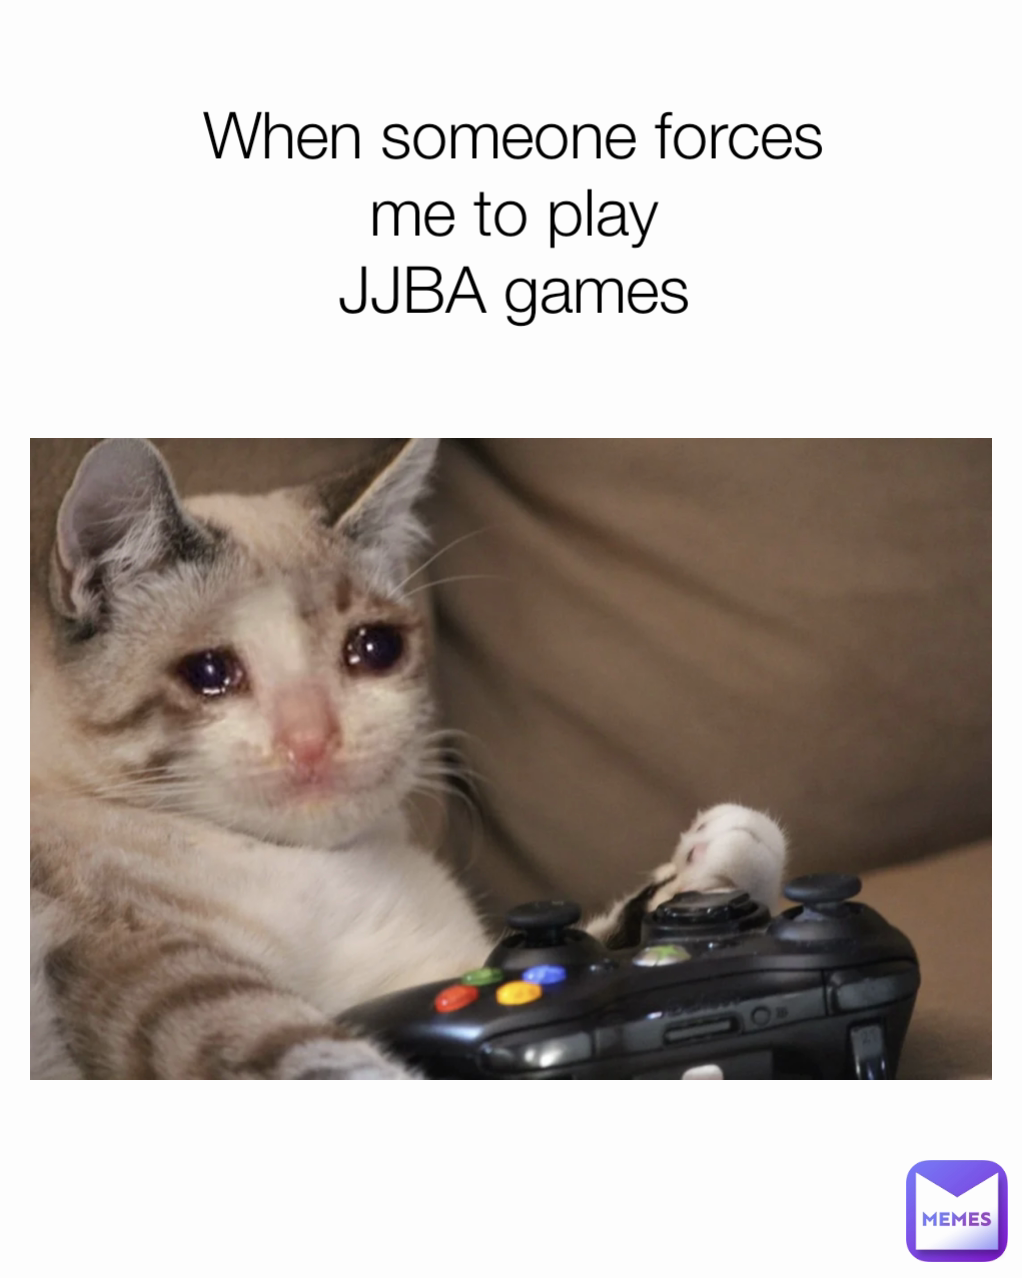 When someone forces
me to play
JJBA games